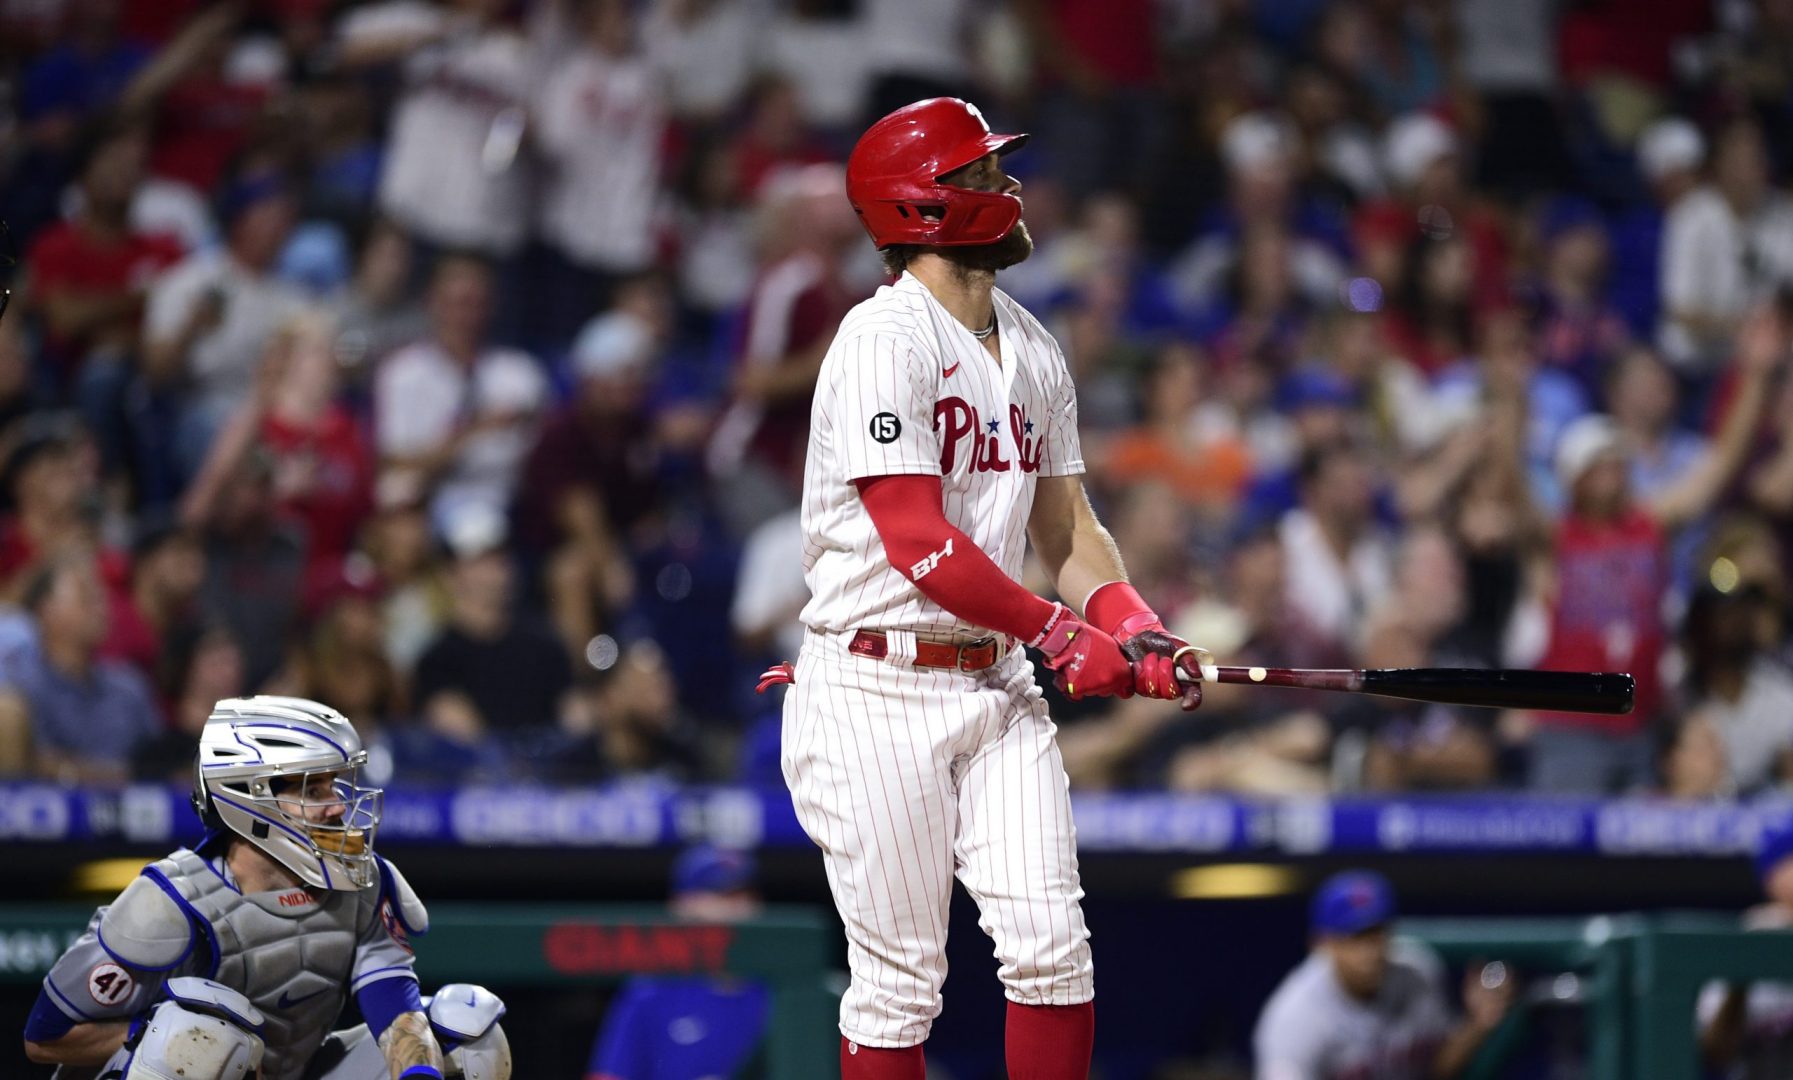 Philadelphia Phillies' Bryce Harper, right, watches his two-run home run off New York Mets' Yennsy Diaz during the eighth inning of a baseball game, Friday, Aug. 6, 2021, in Philadelphia. (AP Photo/Derik Hamilton)